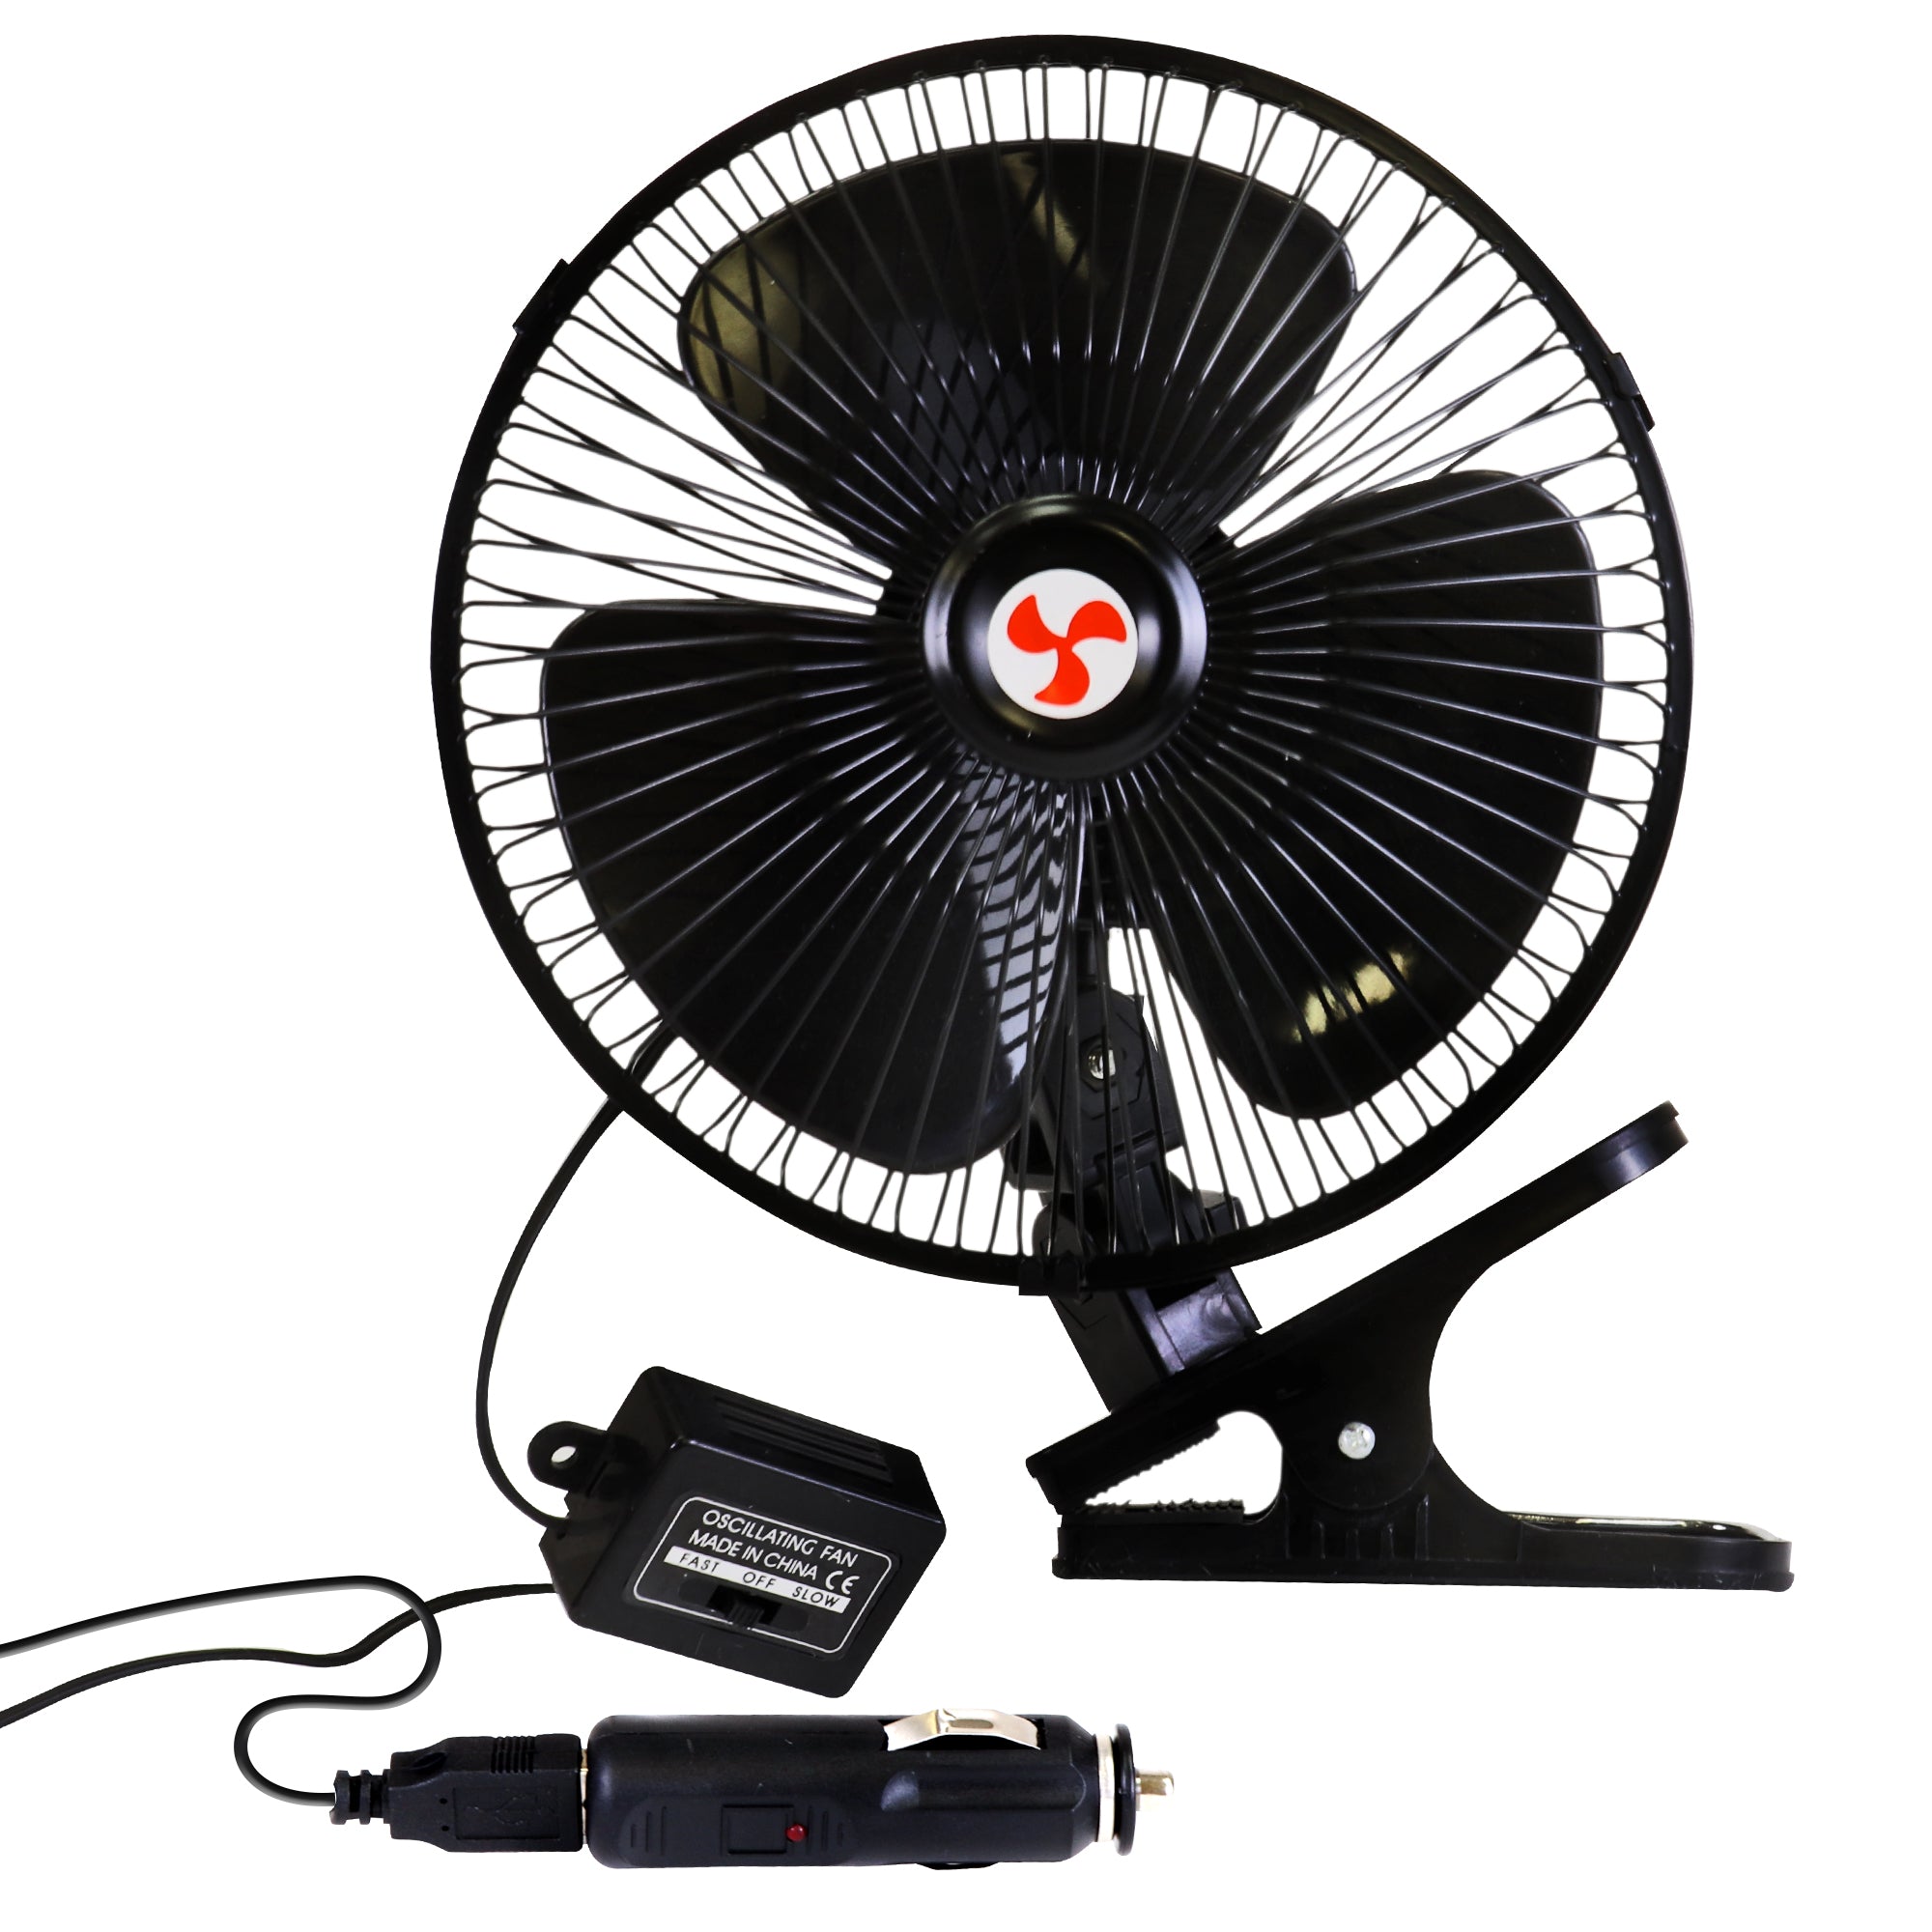 Product shot of 12V oscillating clip-on fan with control switch and power cord visible on a white background